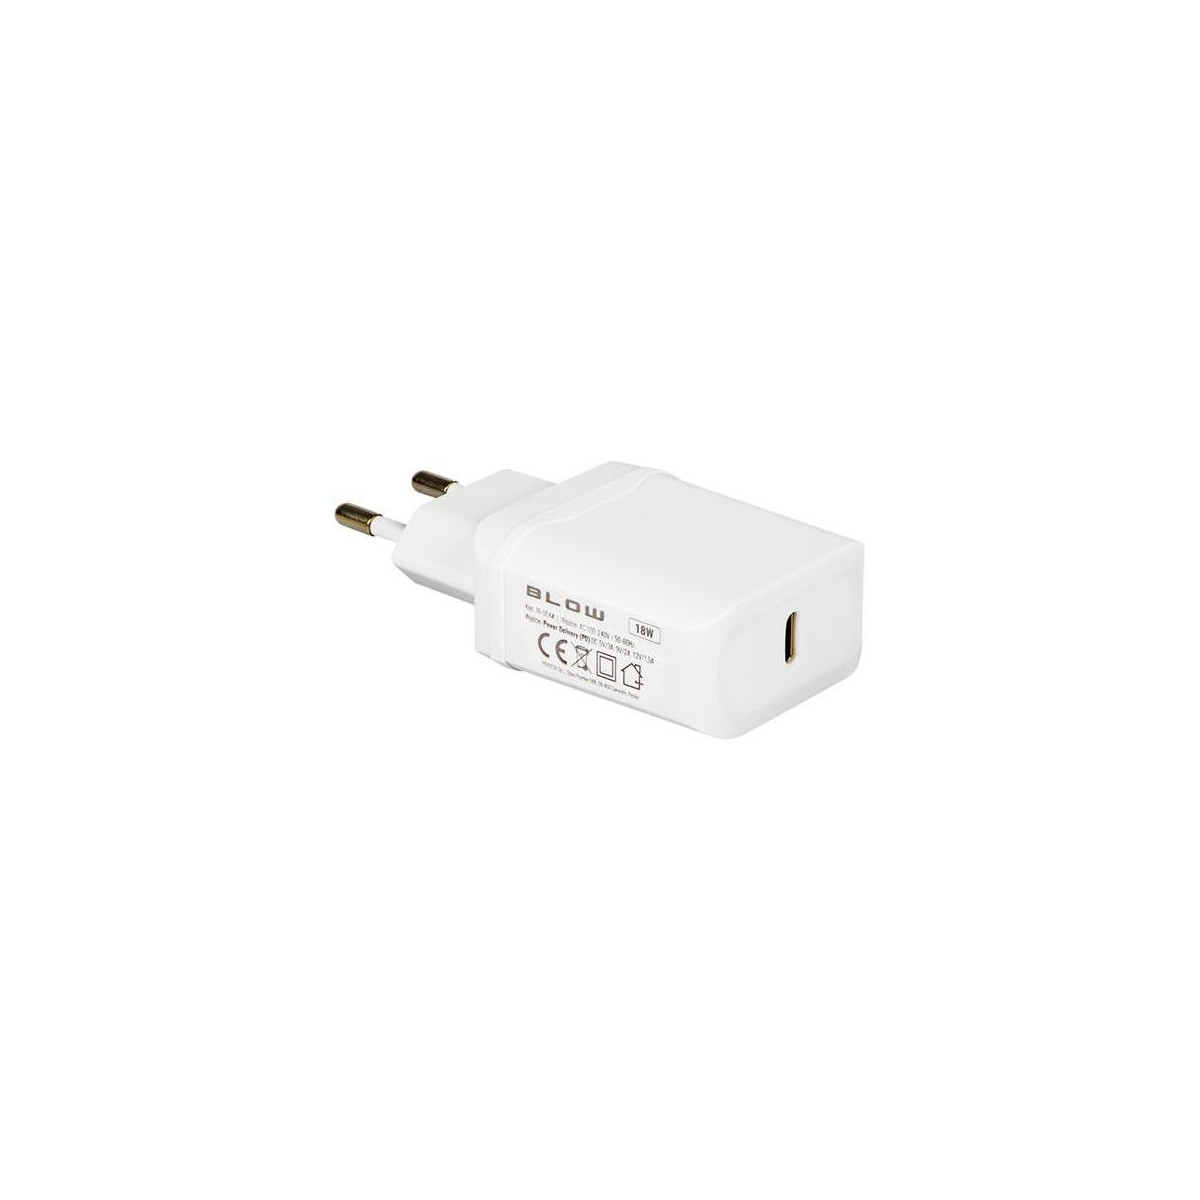 More about Adaptér USB BLOW 76-004